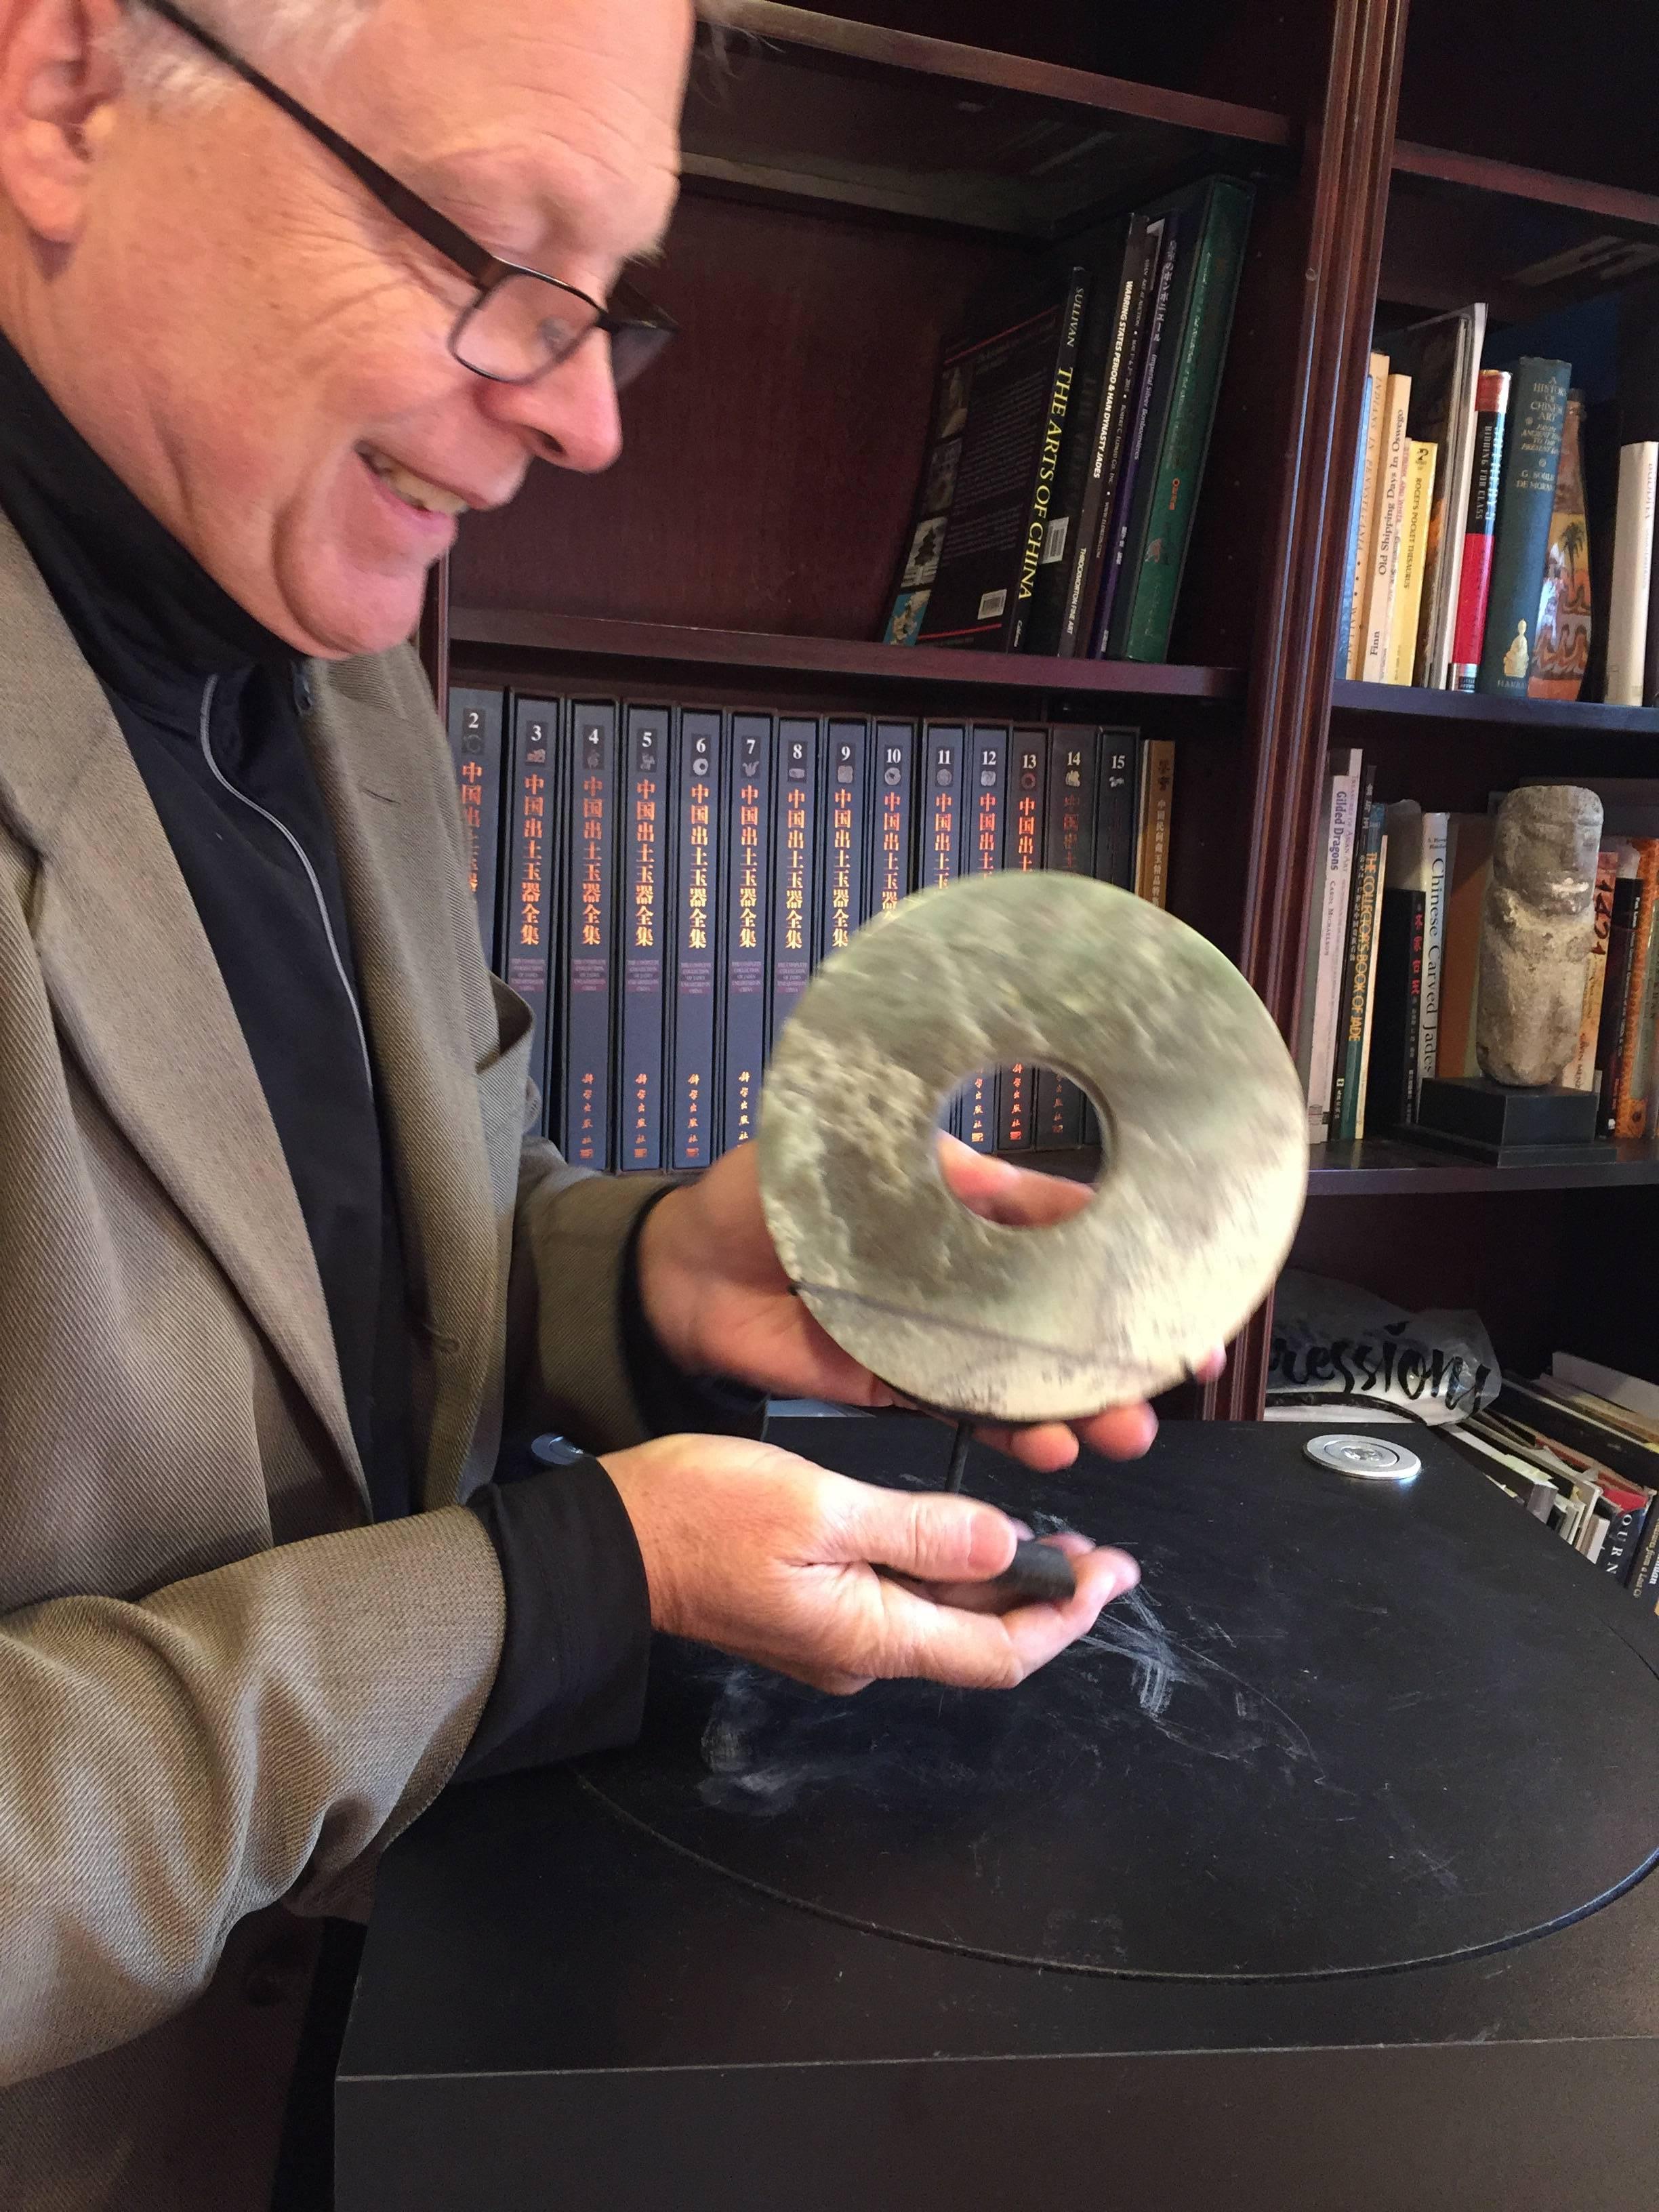 This is an authentic Chinese ancient jade bi disc from the Qi Jia Culture, Northwestern China, 3,000-2,000 BCE. This comes from our private collection. 

Dimensions: the bi disc is 6.8 inches diameter and with stand it is 9.5 inches